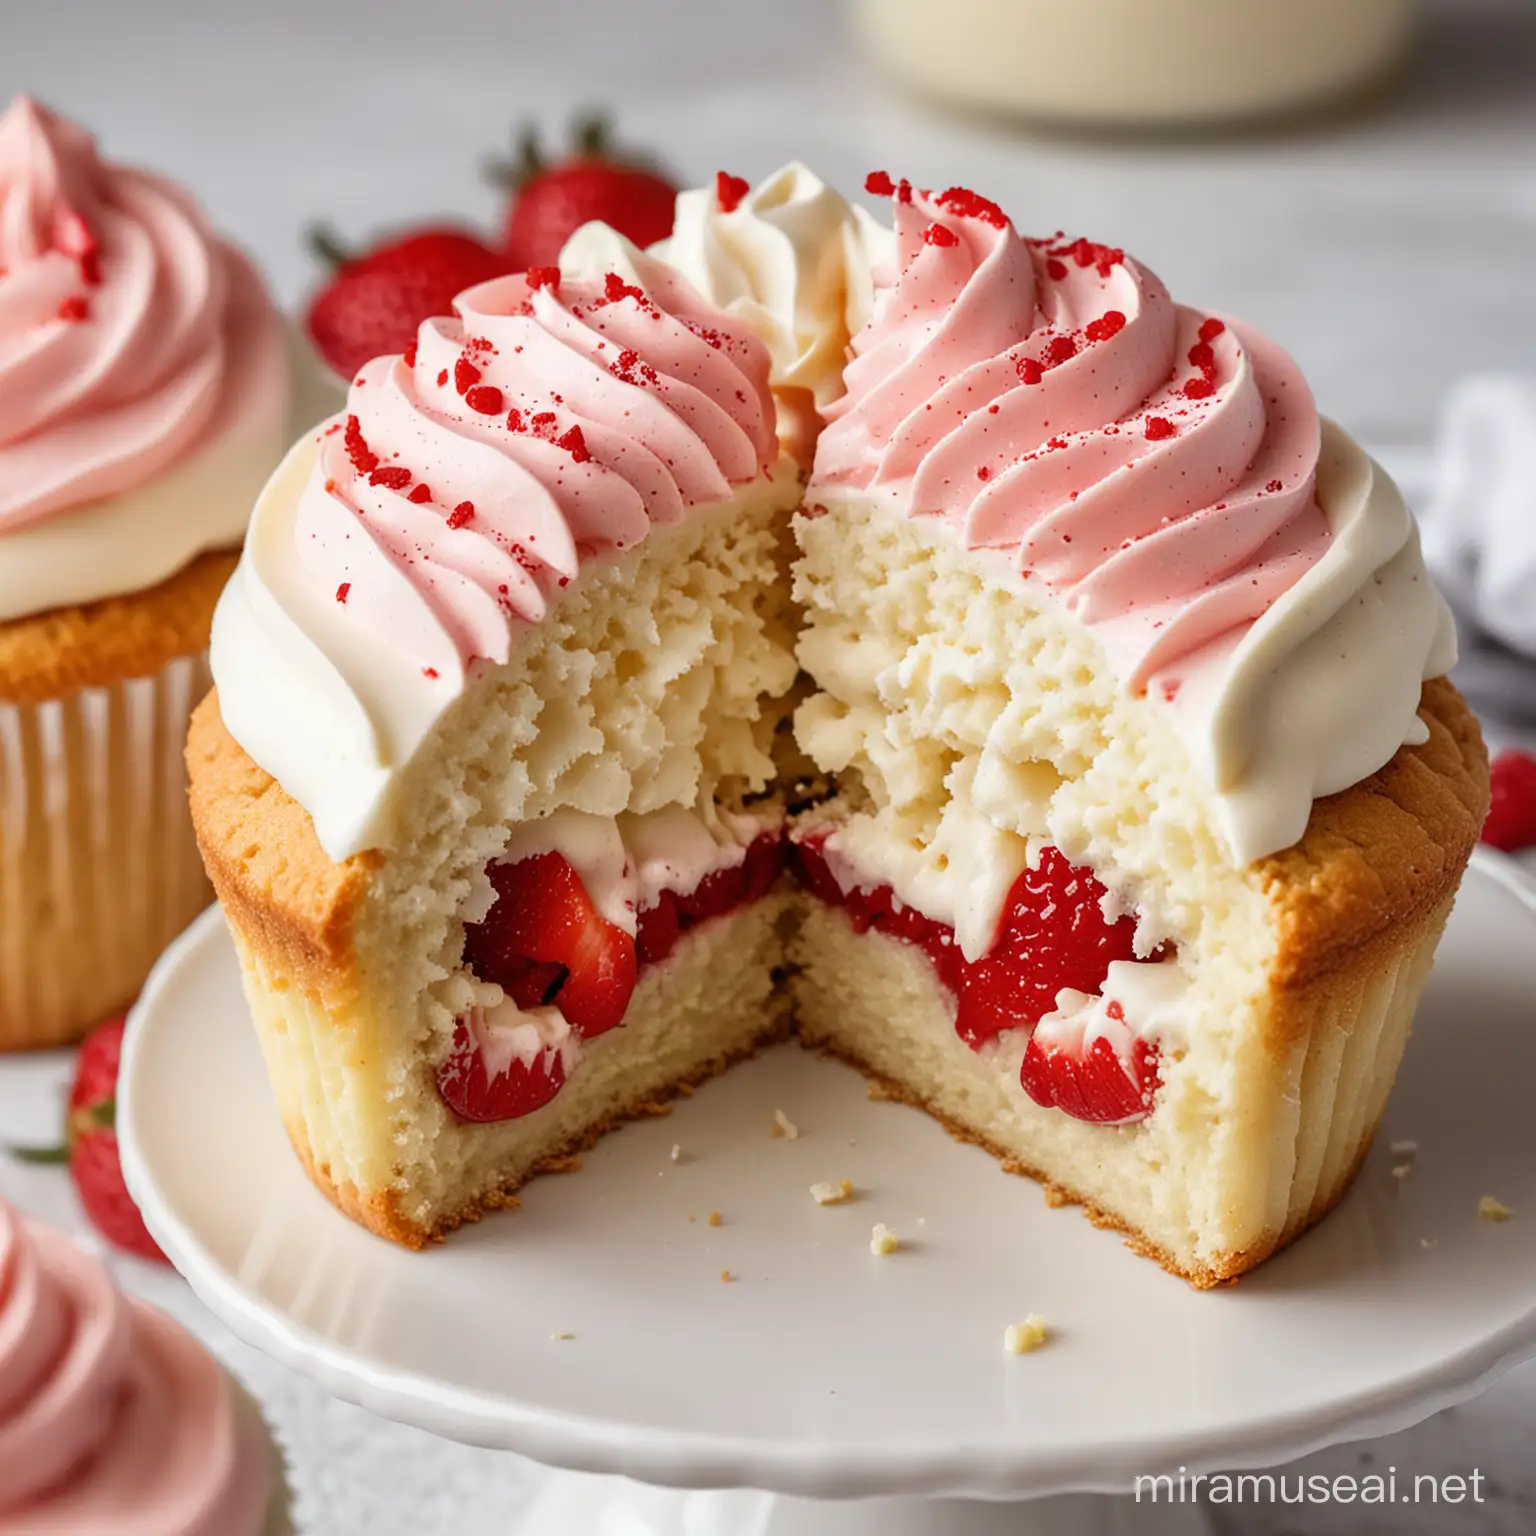 Closeup of Halved Strawberry Muffin with Decadent White Chocolate Frosting